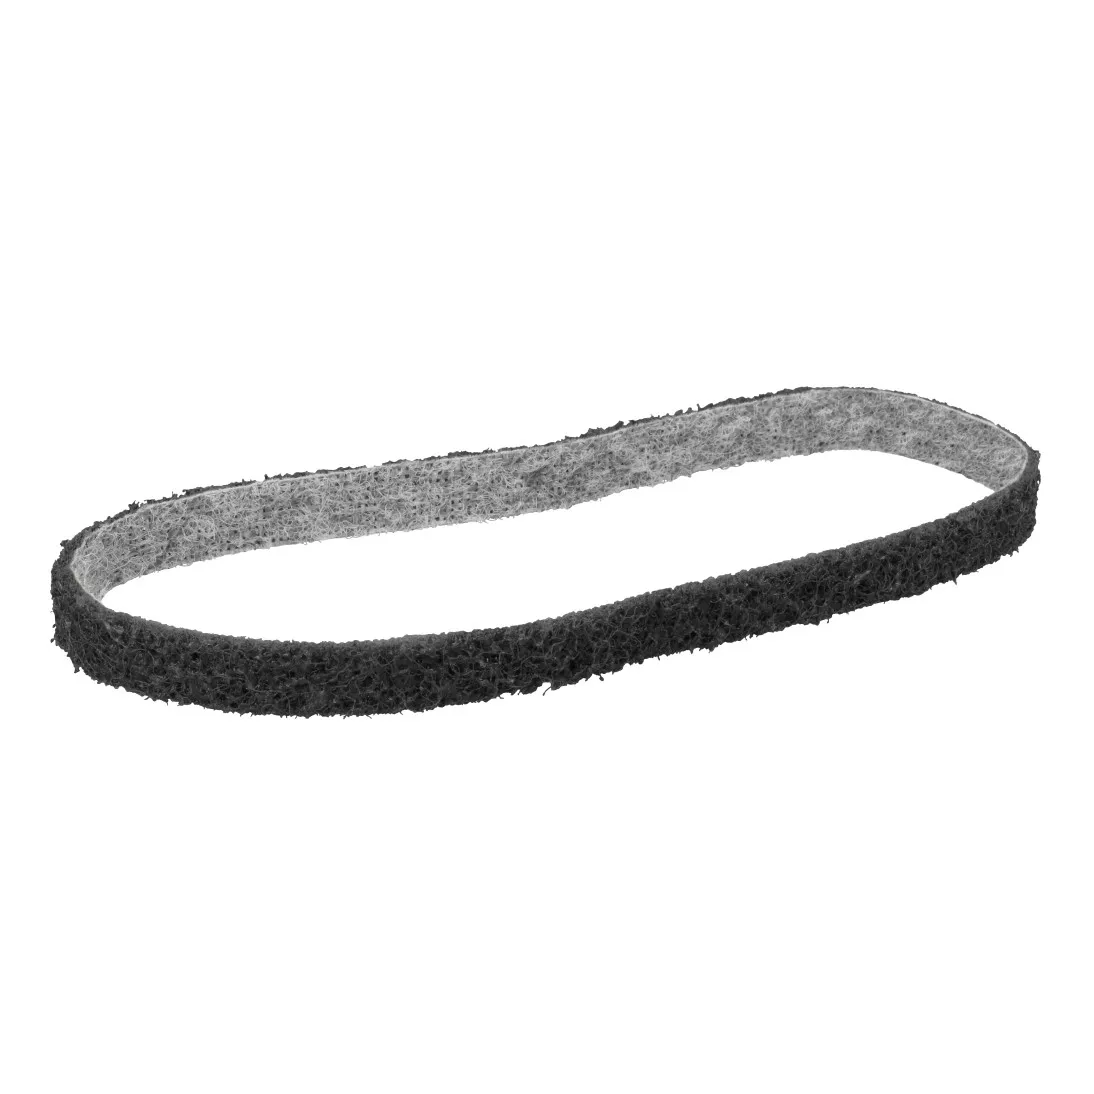 Scotch-Brite™ Surface Conditioning Low Stretch Belt, 4 in x 120 in, S
SFN, 8 ea/Case, Restricted